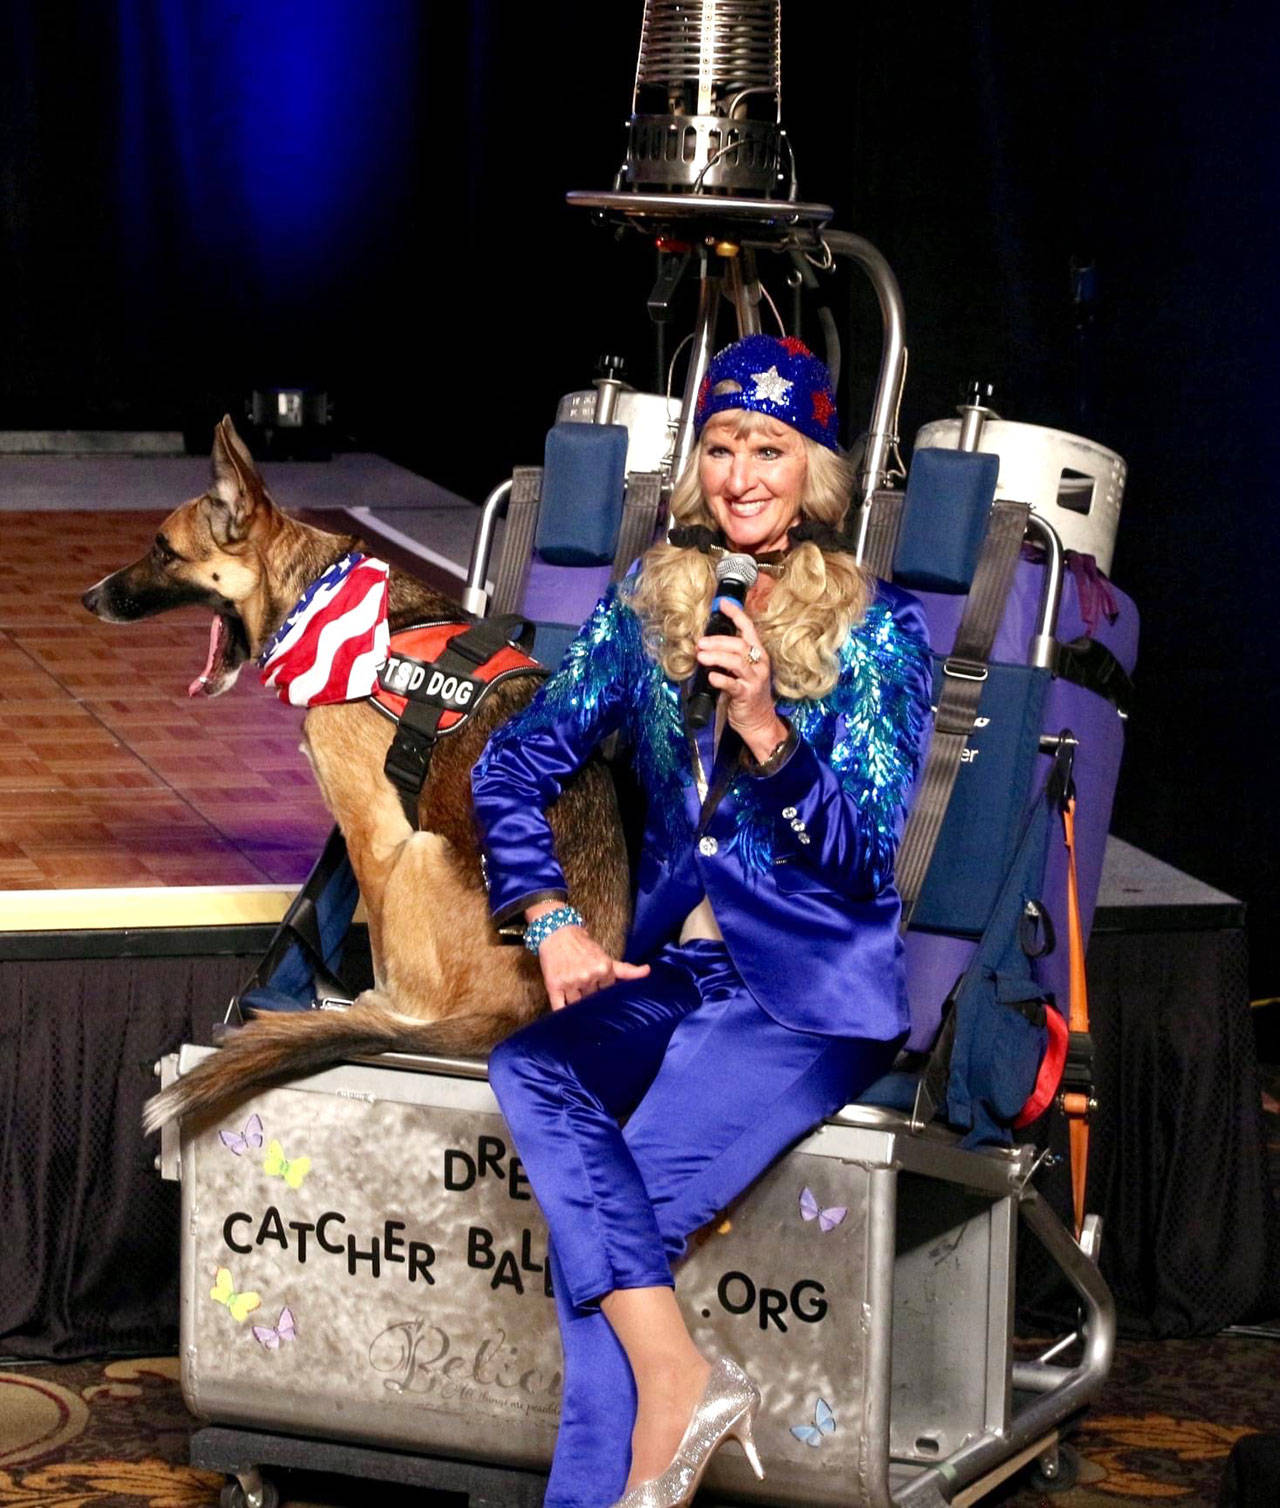 Captain-Crystal Stout, with her therapy dog Lucee Light, speaks to judges and audience members about her Dream Catcher Balloon Program on Oct. 8 during the Ms. Senior United States pageant. She received the title that night. (Photo courtesy of Captain-Crystal Stout)